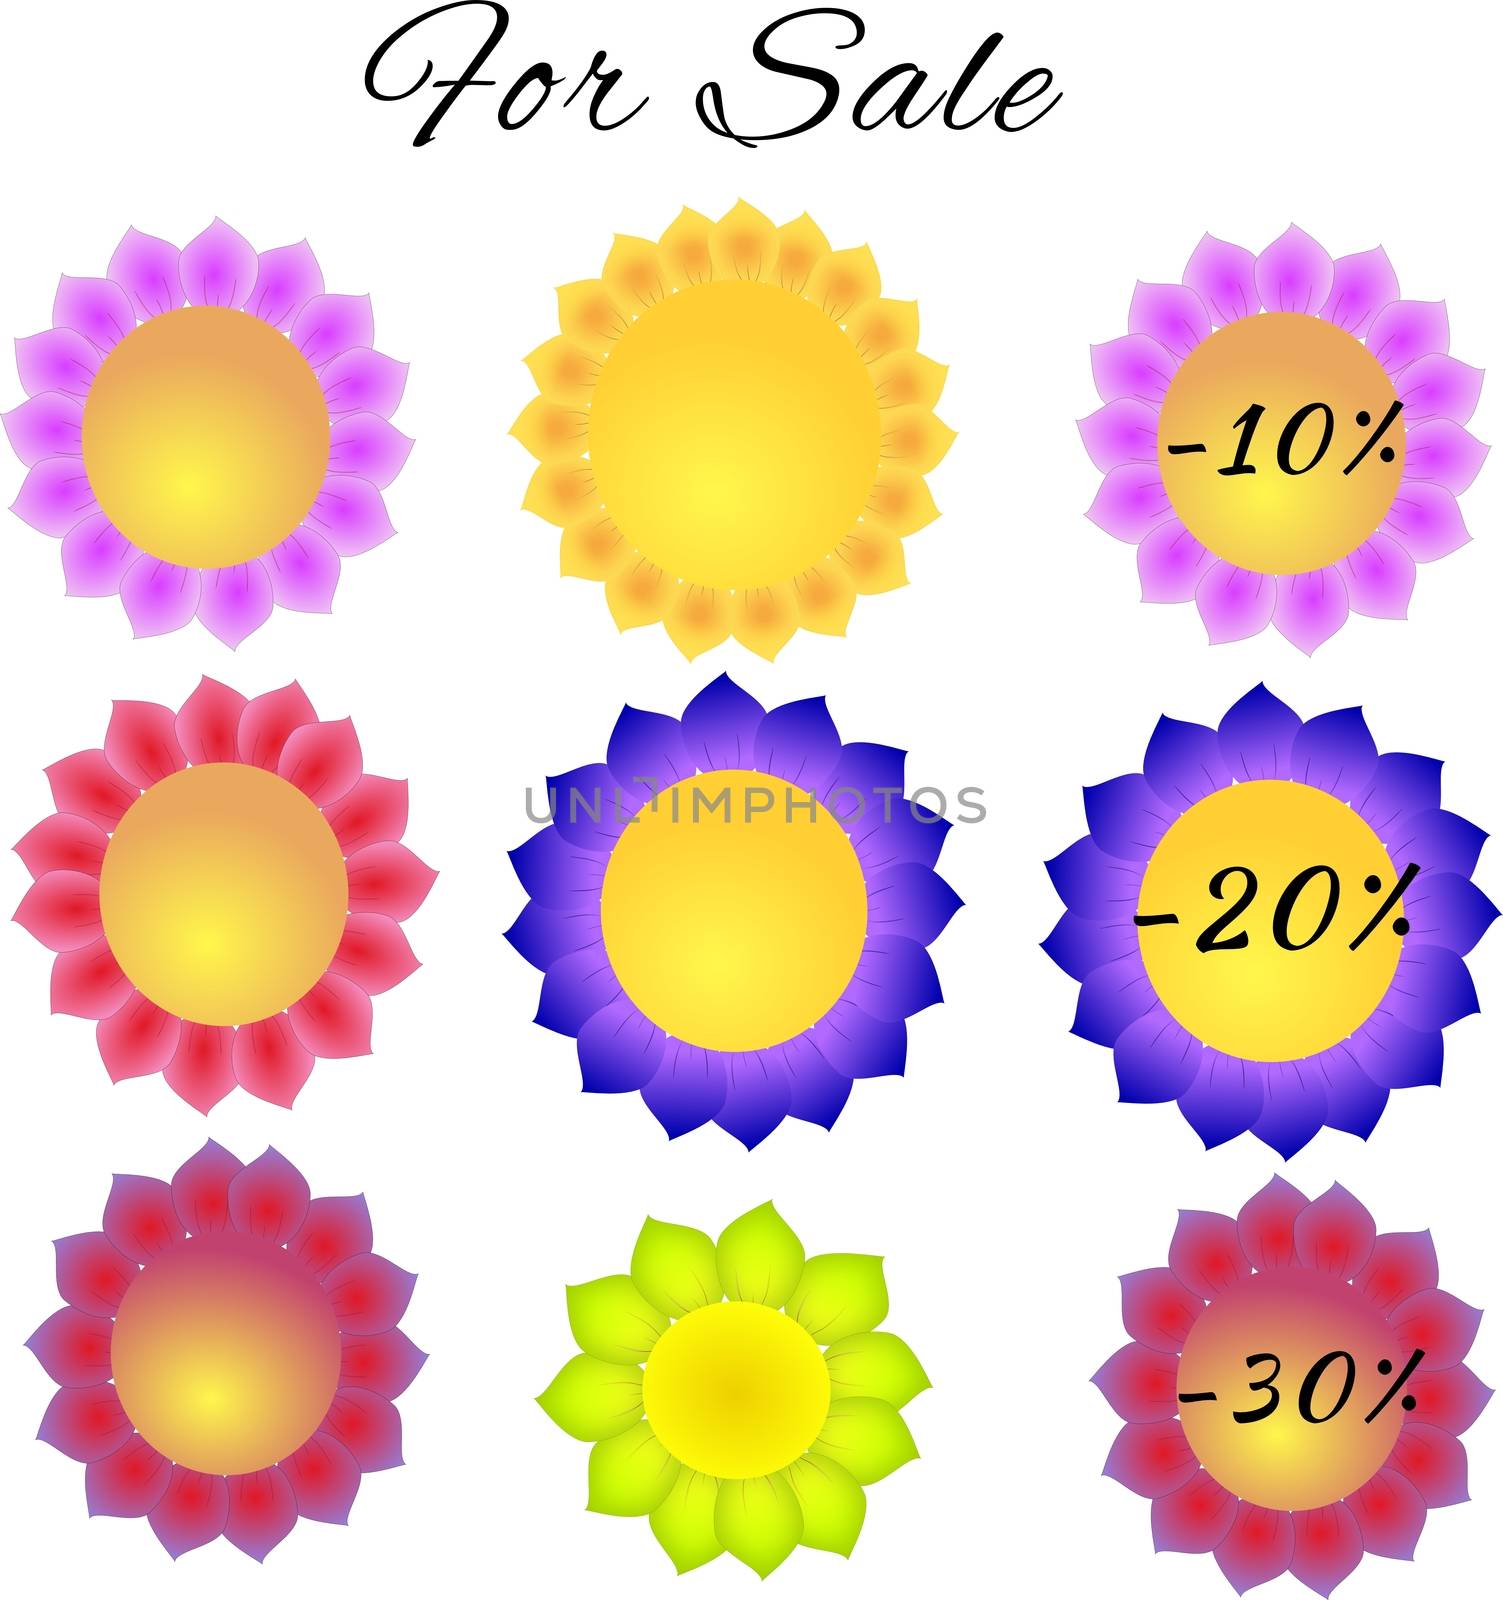 Illustration of paper flowers tags for spring discounts isolated on a white background